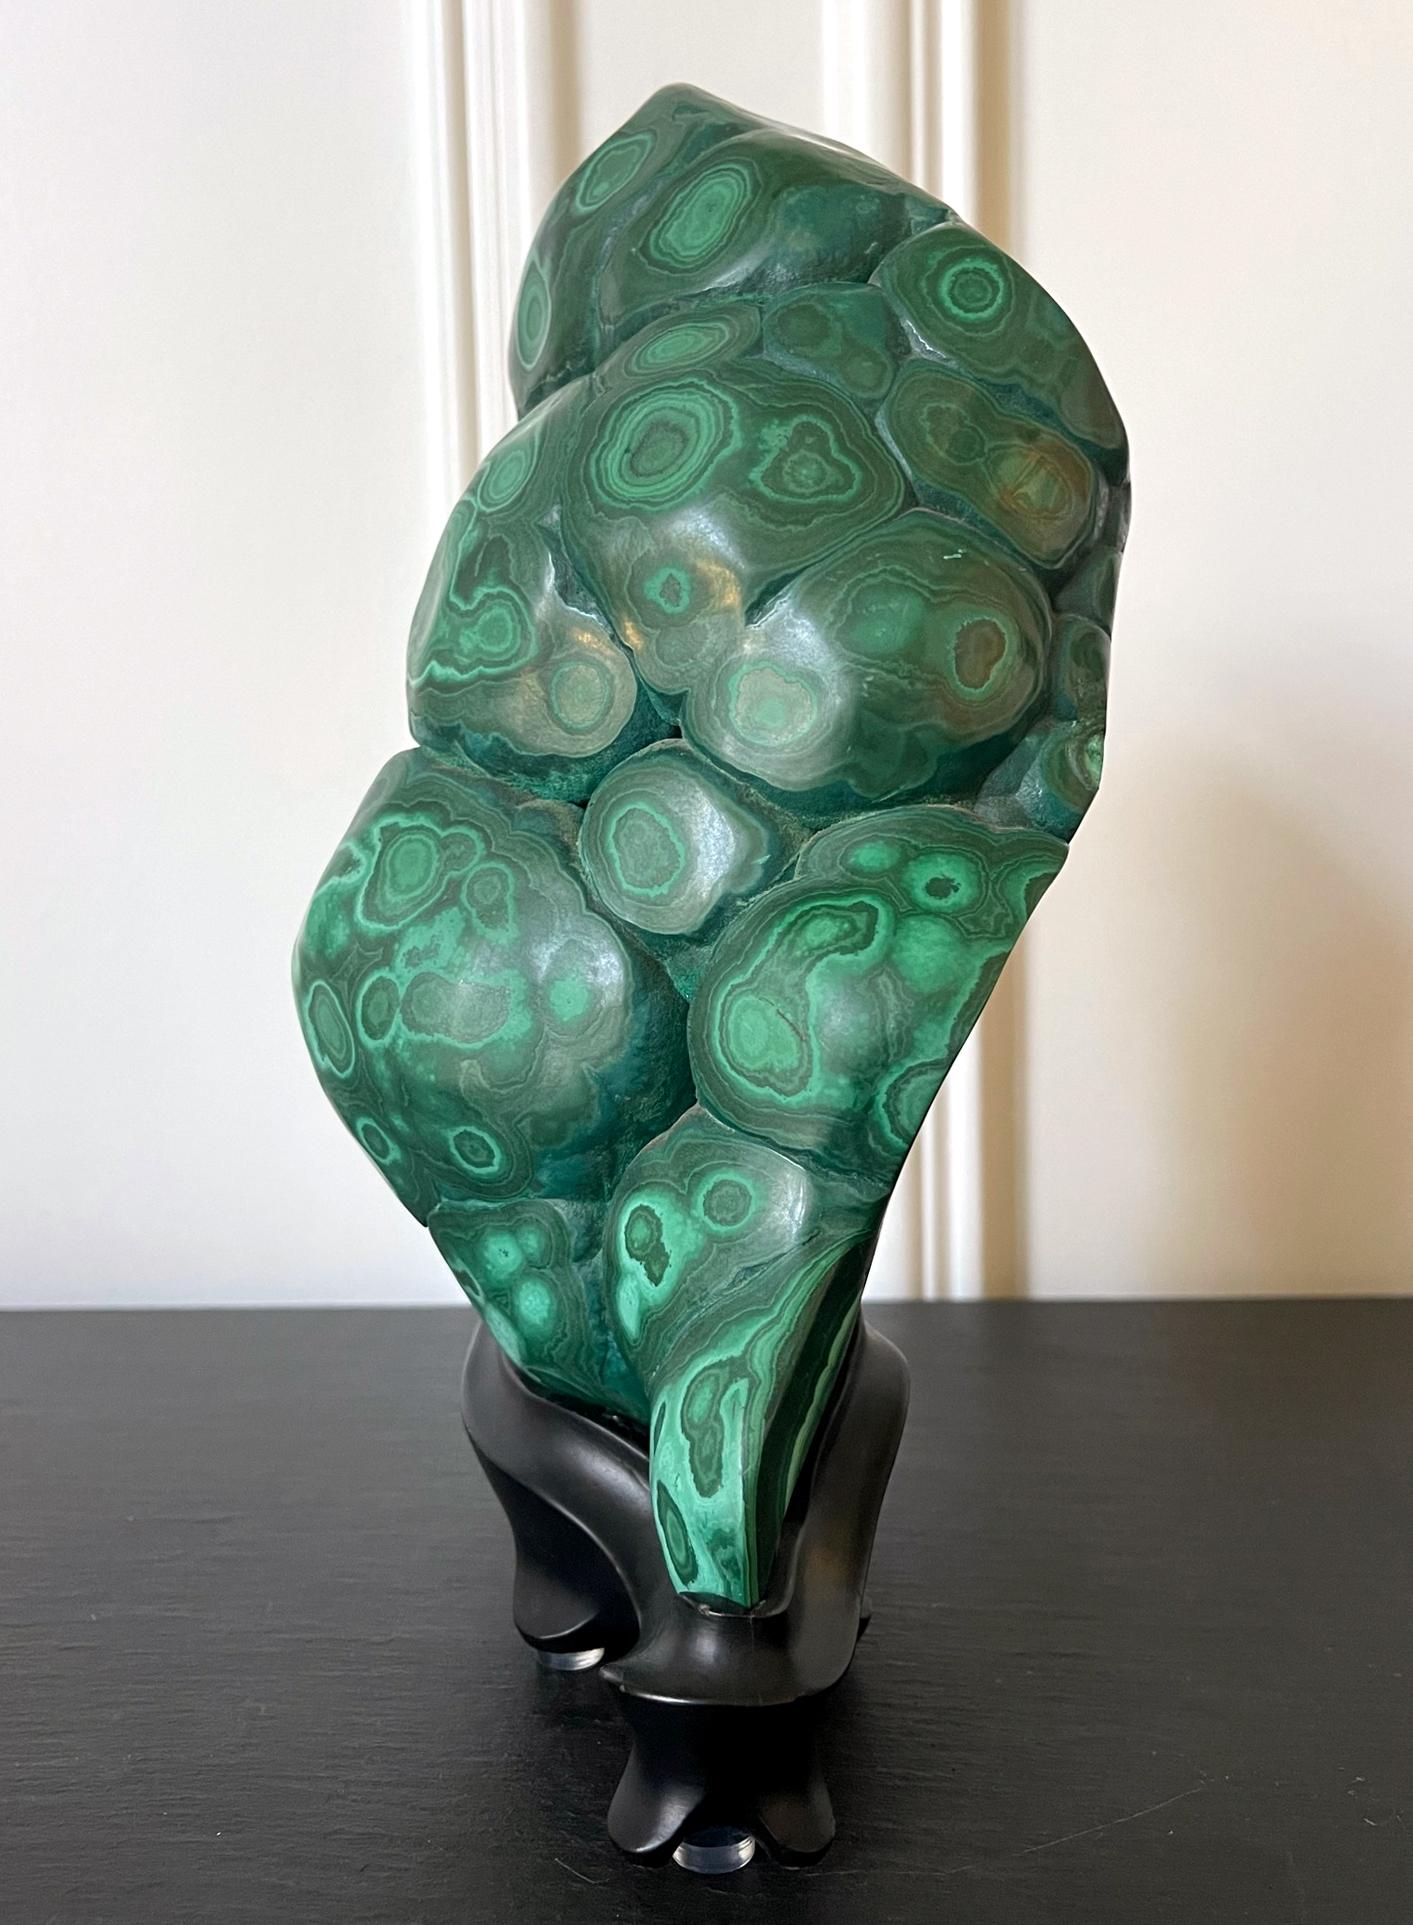 American Malachite Rock on Display Stand as a Chinese Scholar Stone